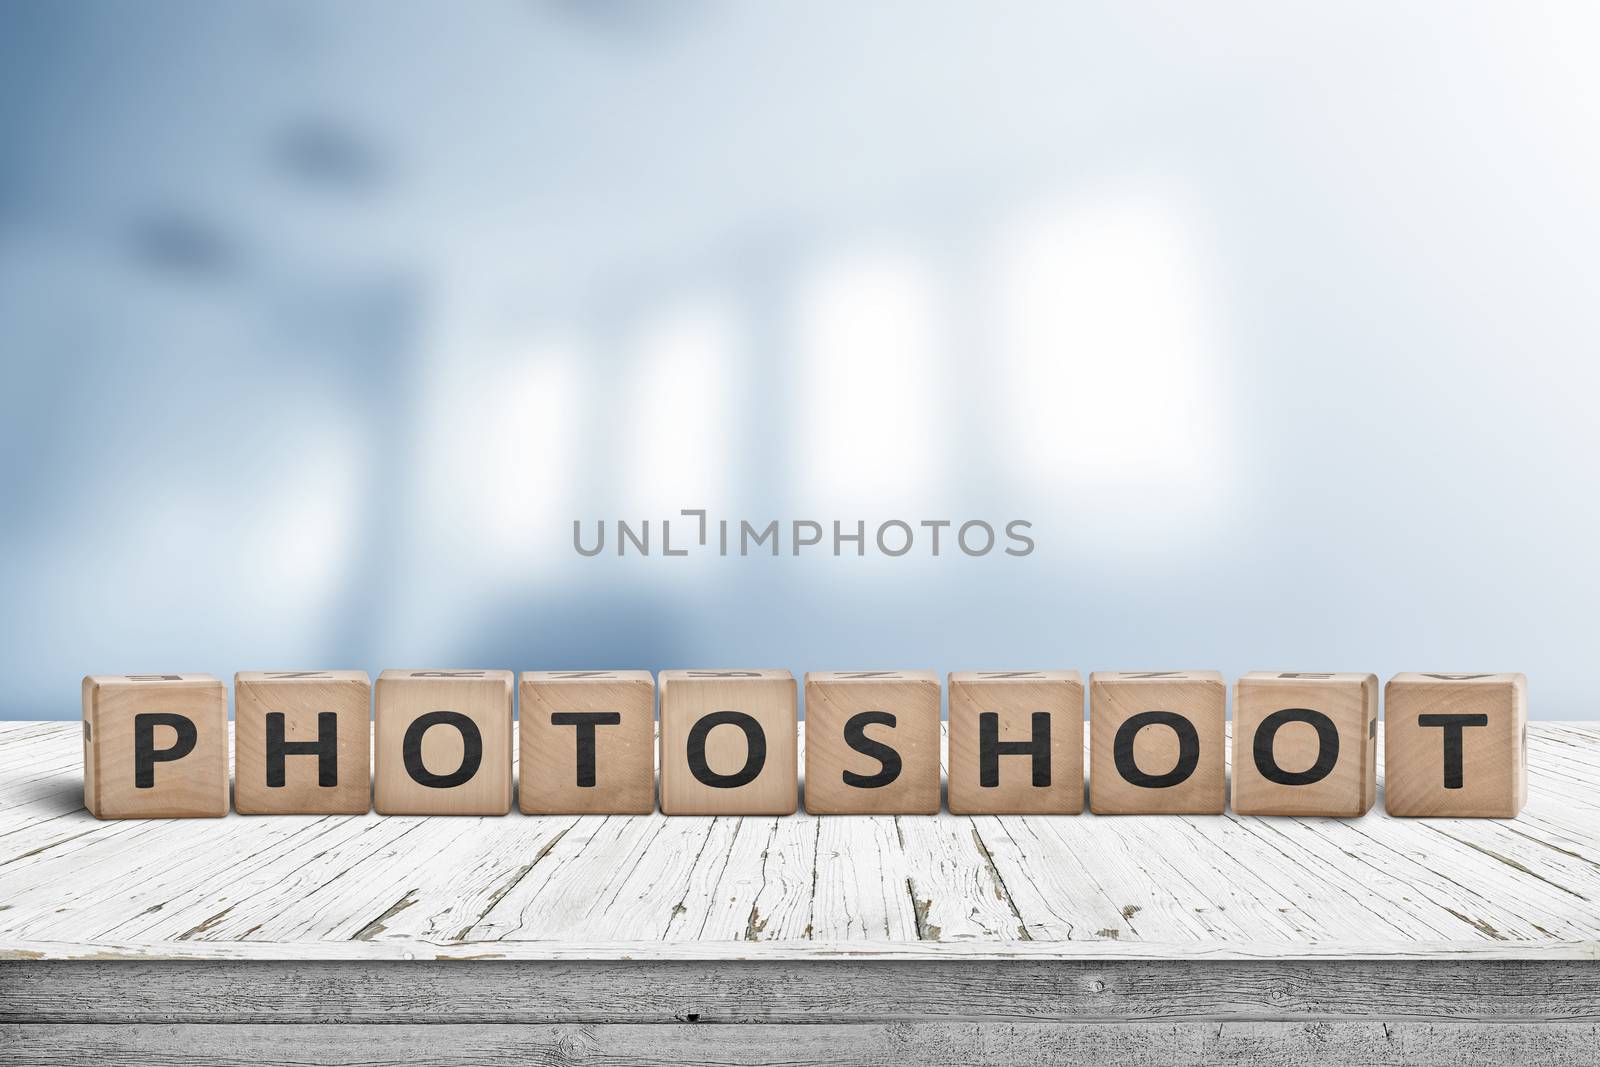 Photoshoot word sign on a wooden desk by Sportactive